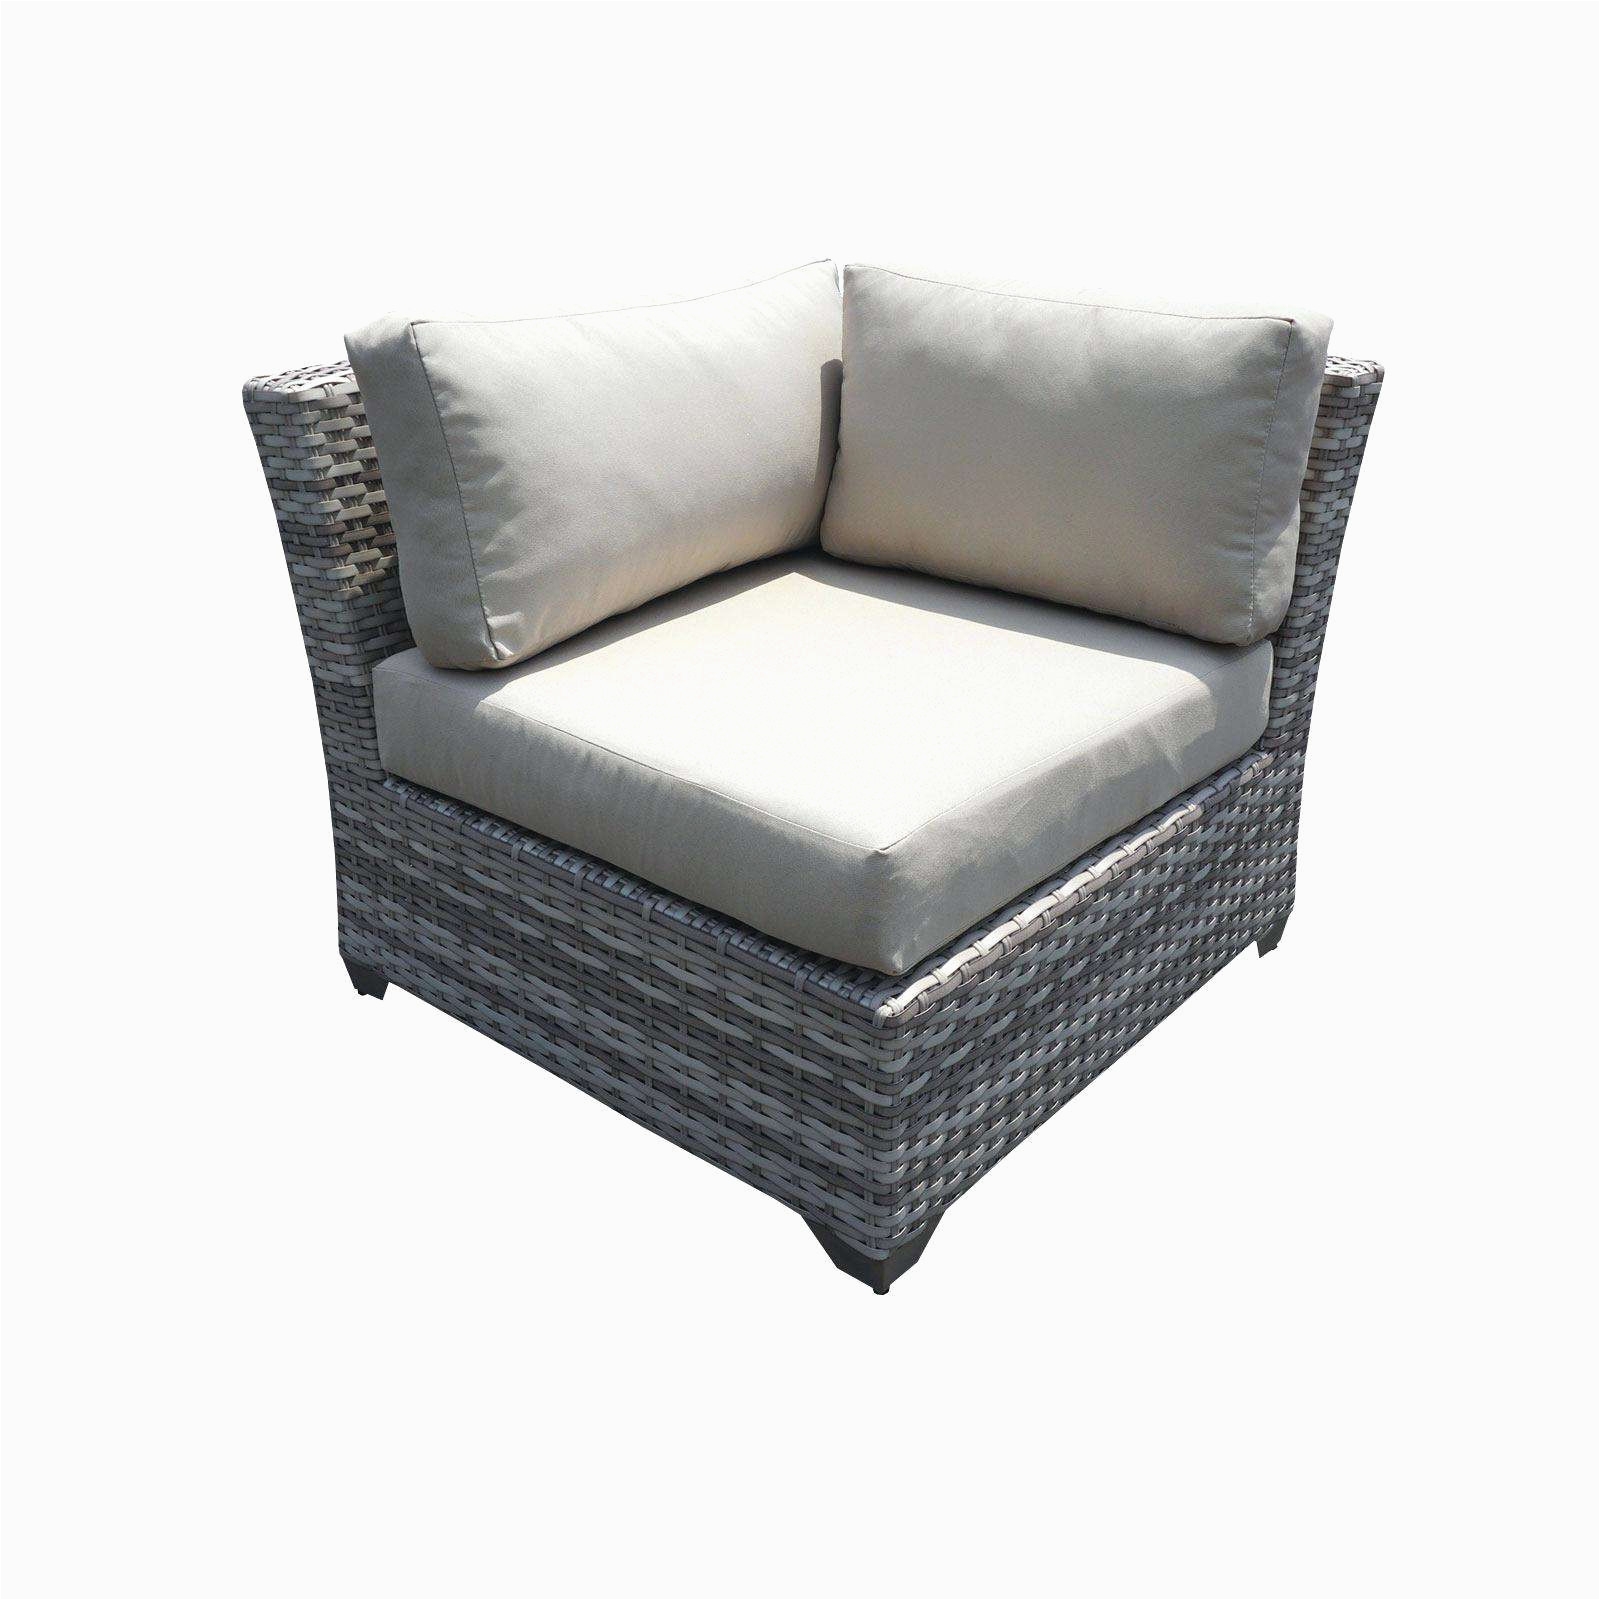 Replacement Chair Legs Home Depot Chair Home Depot Bench Marvelous Wicker Outdoor sofa 0d Patio